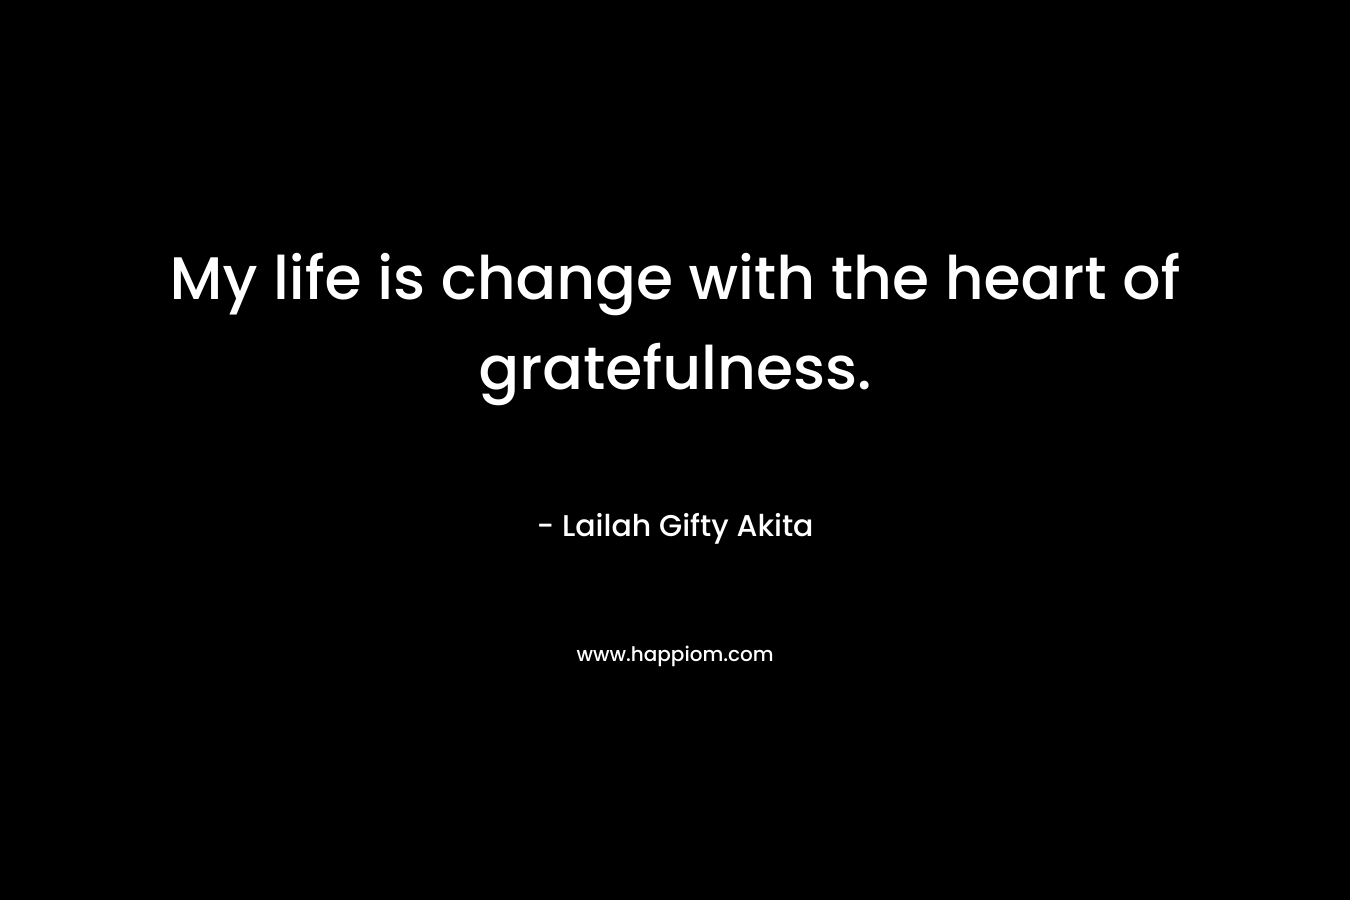 My life is change with the heart of gratefulness.